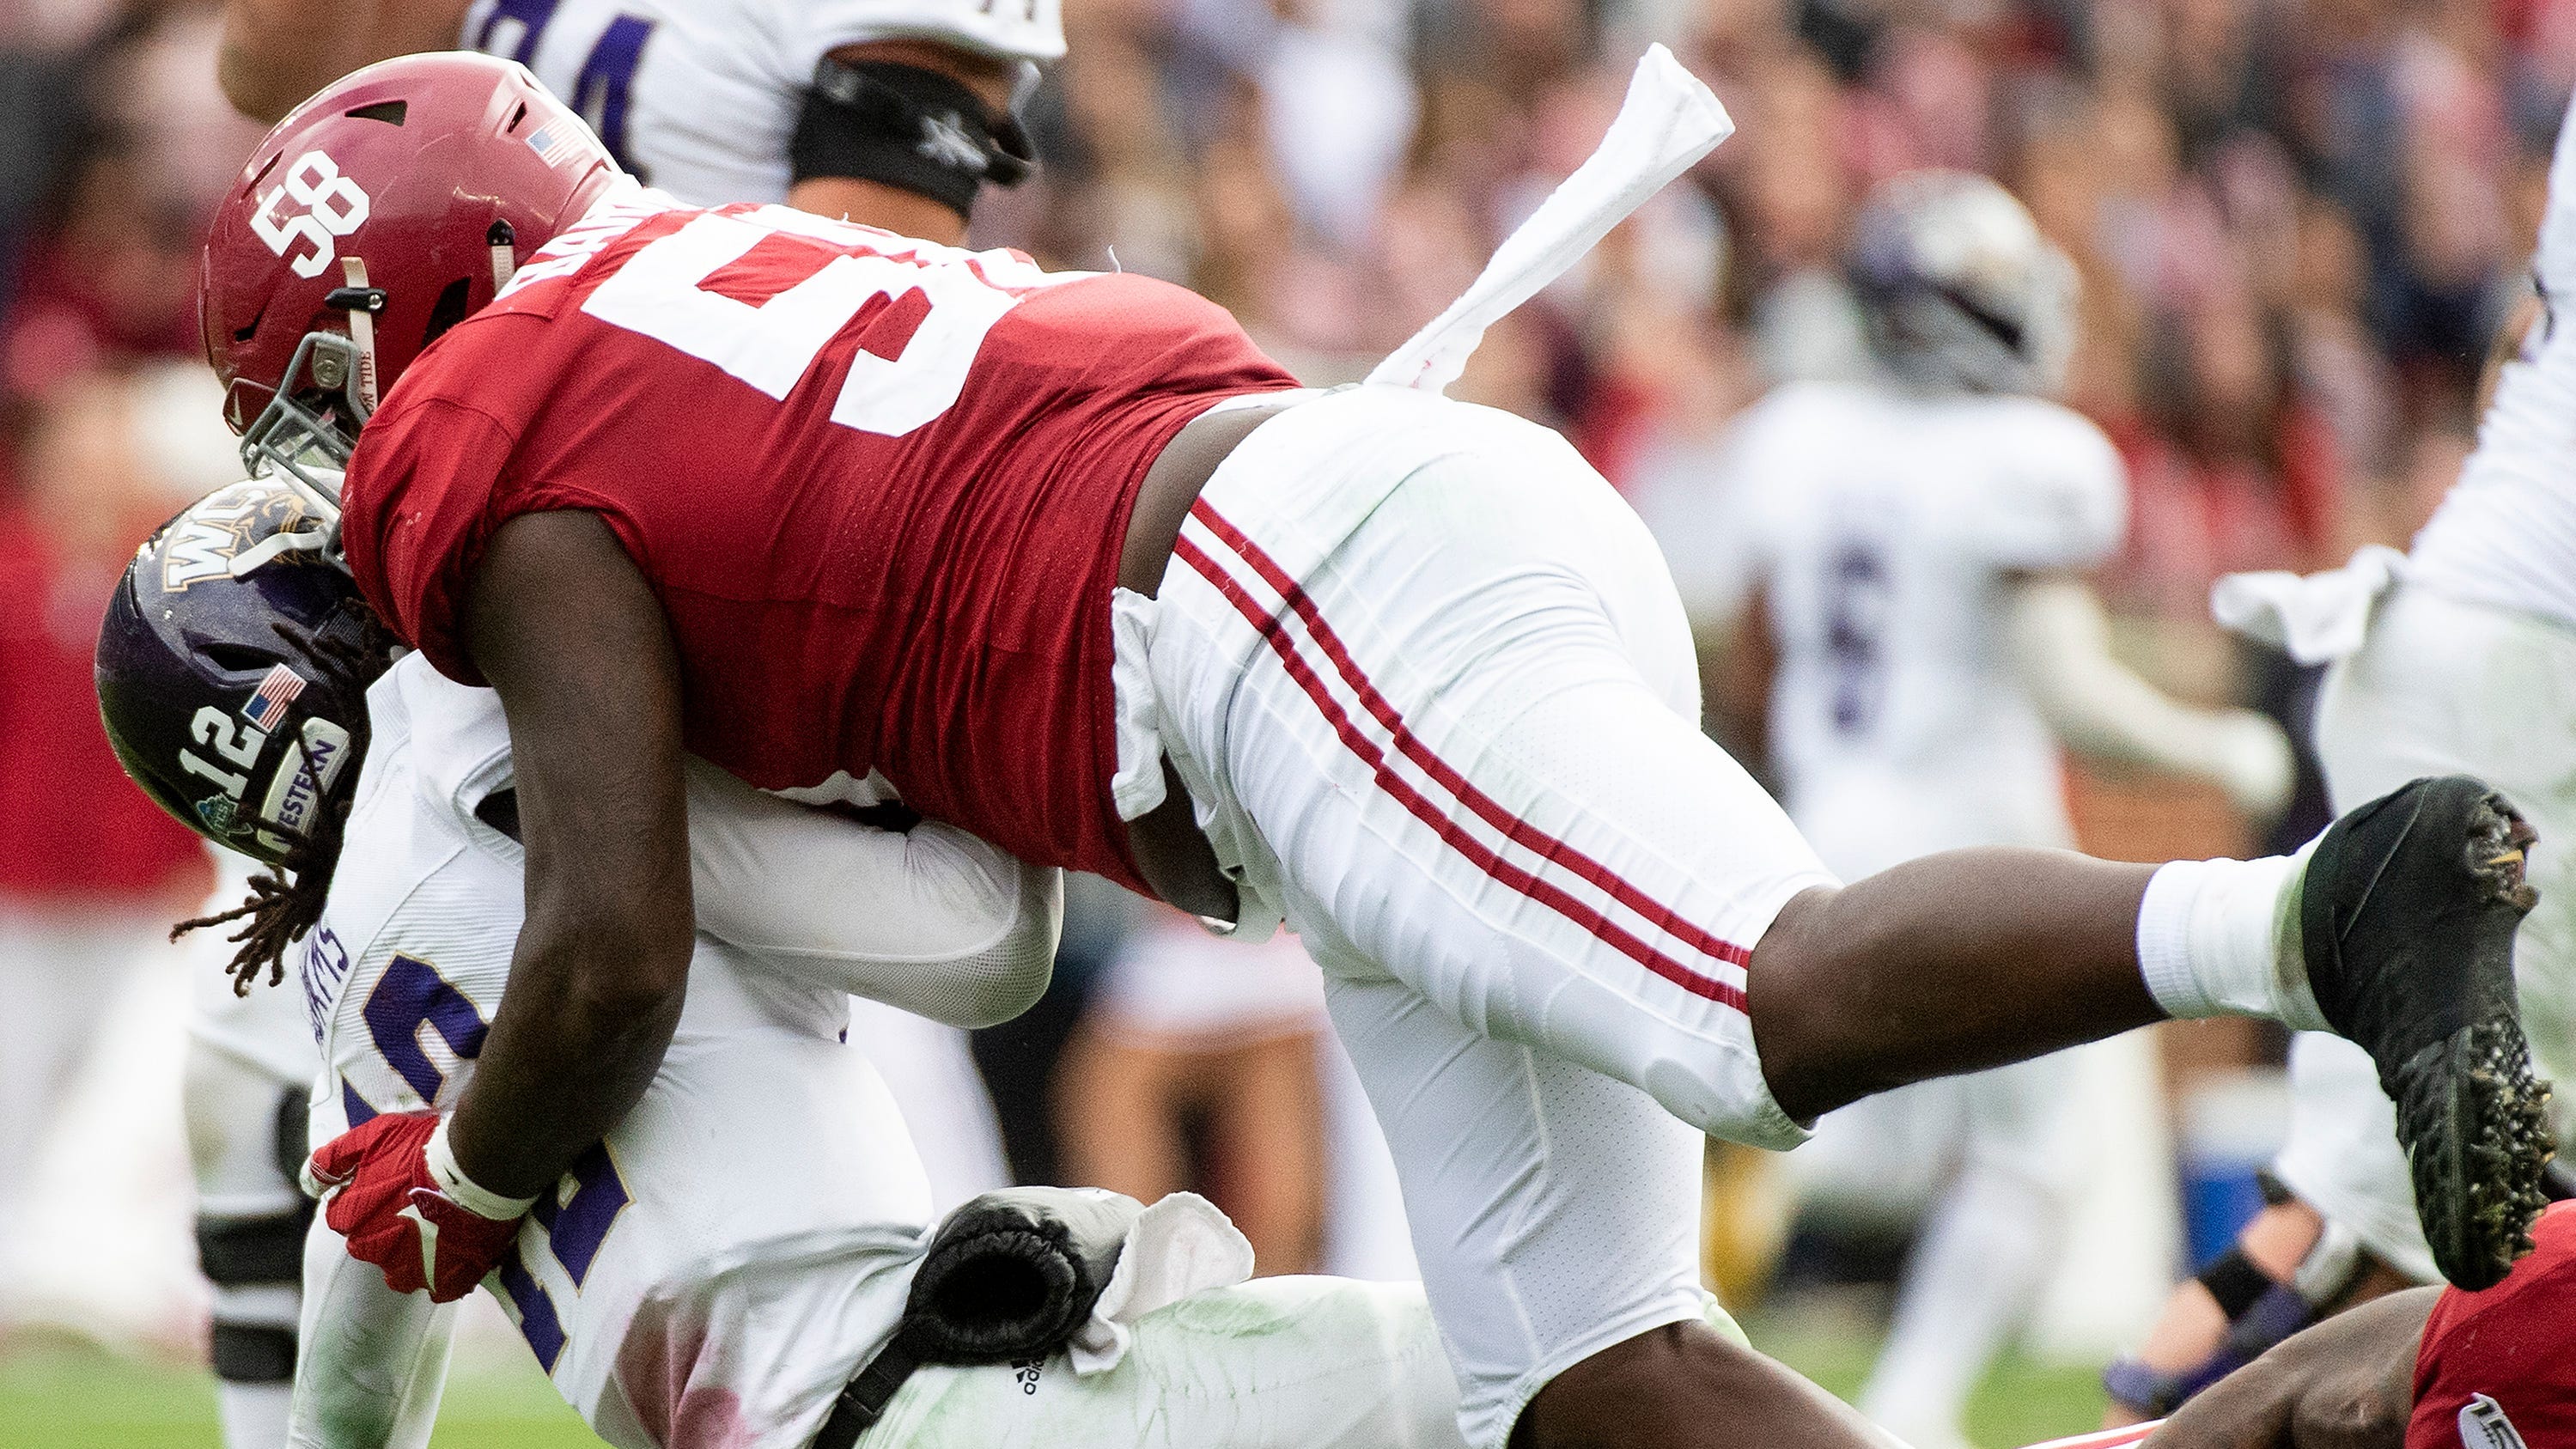 2021 NFL draft DT rankings Top defensive tackle prospects